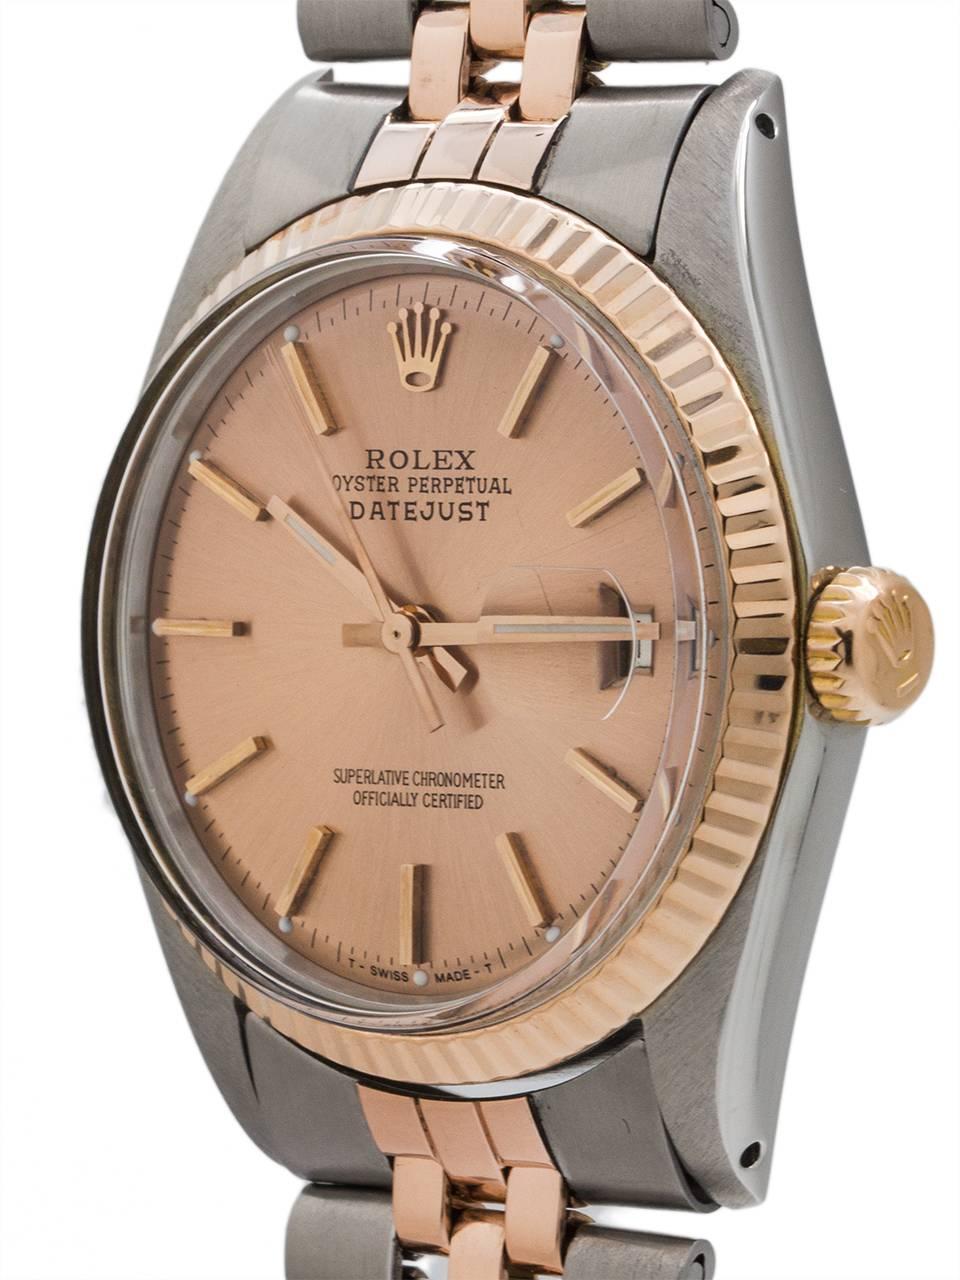 
Fabulous collector’s example Rolex Stainless Steel and 14K Pink Gold Datejust ref 1601 serial # 3.9 million circa 1974. Full sized man’s model 36mm diameter Oyster case with fluted 14K pink gold bezel and acrylic crystal. With original matte